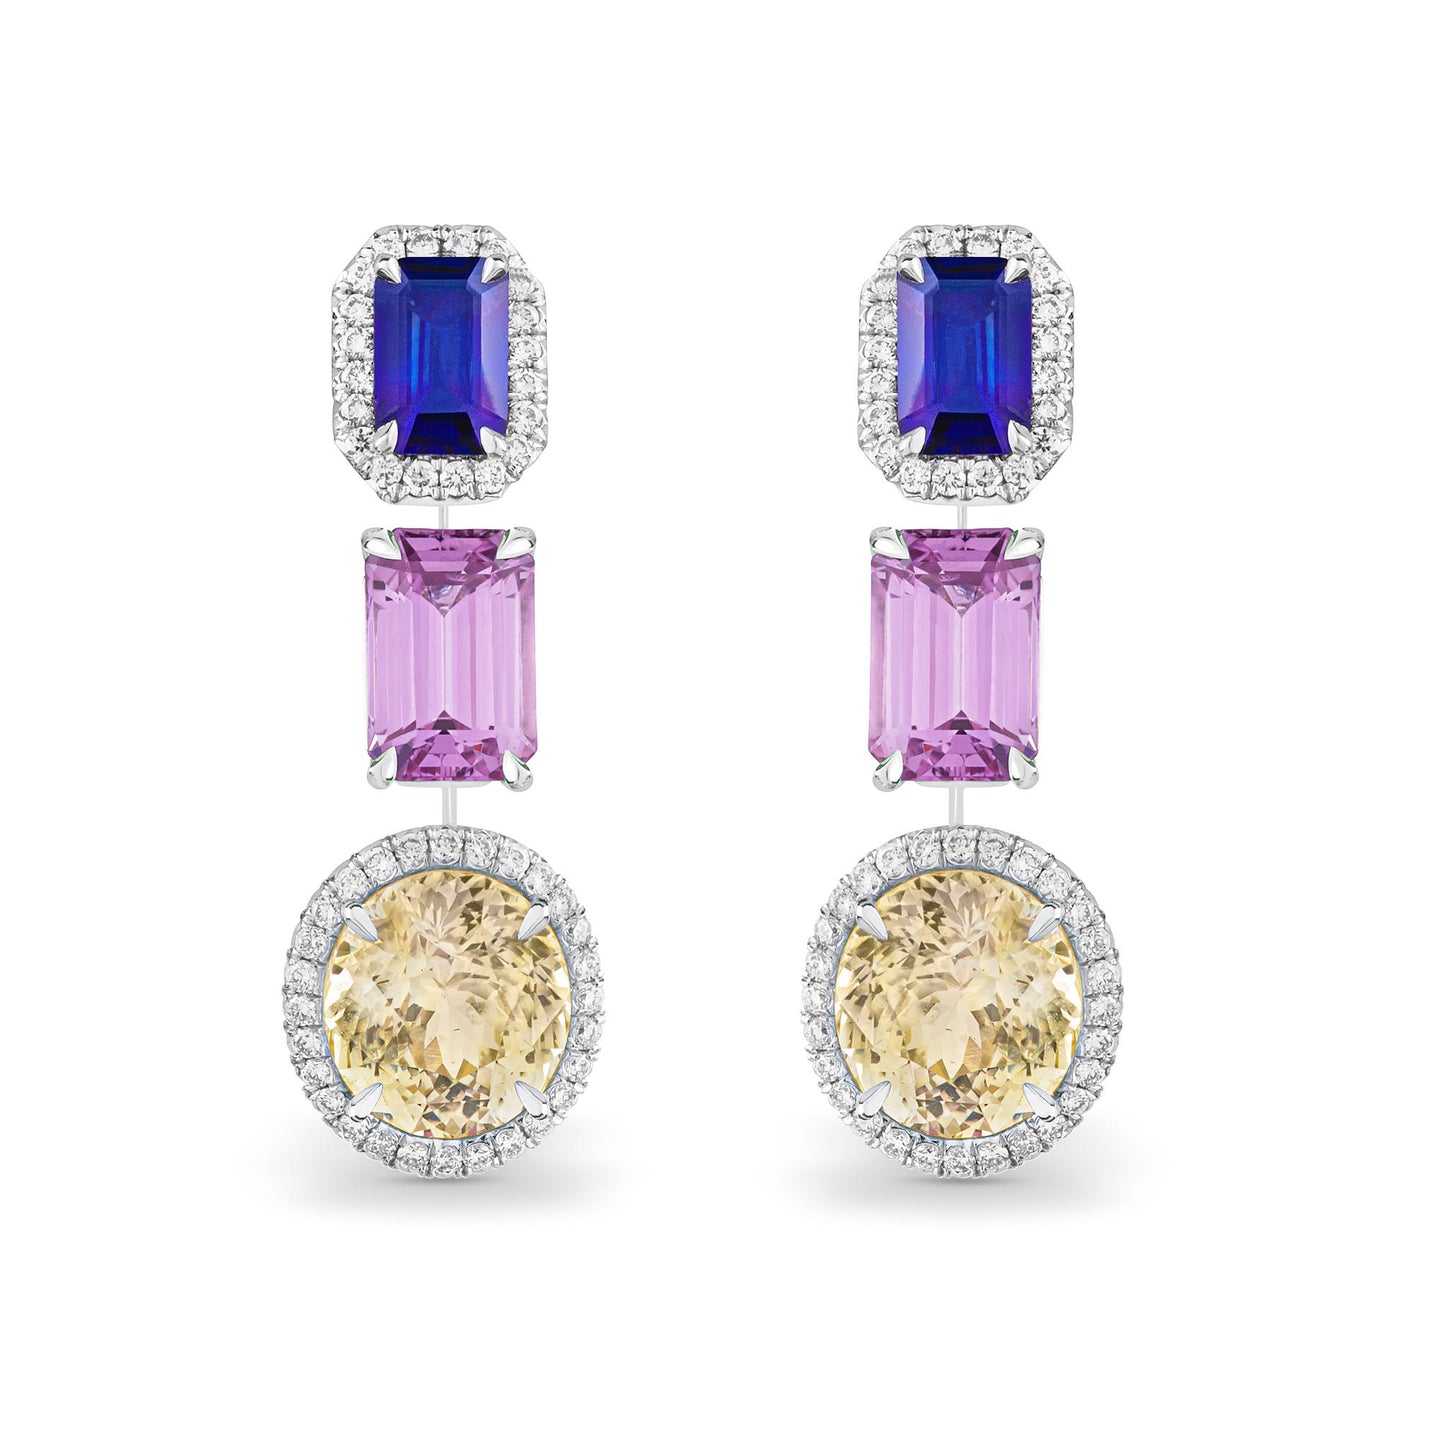 Platinum Earrings with Sapphires and Diamonds